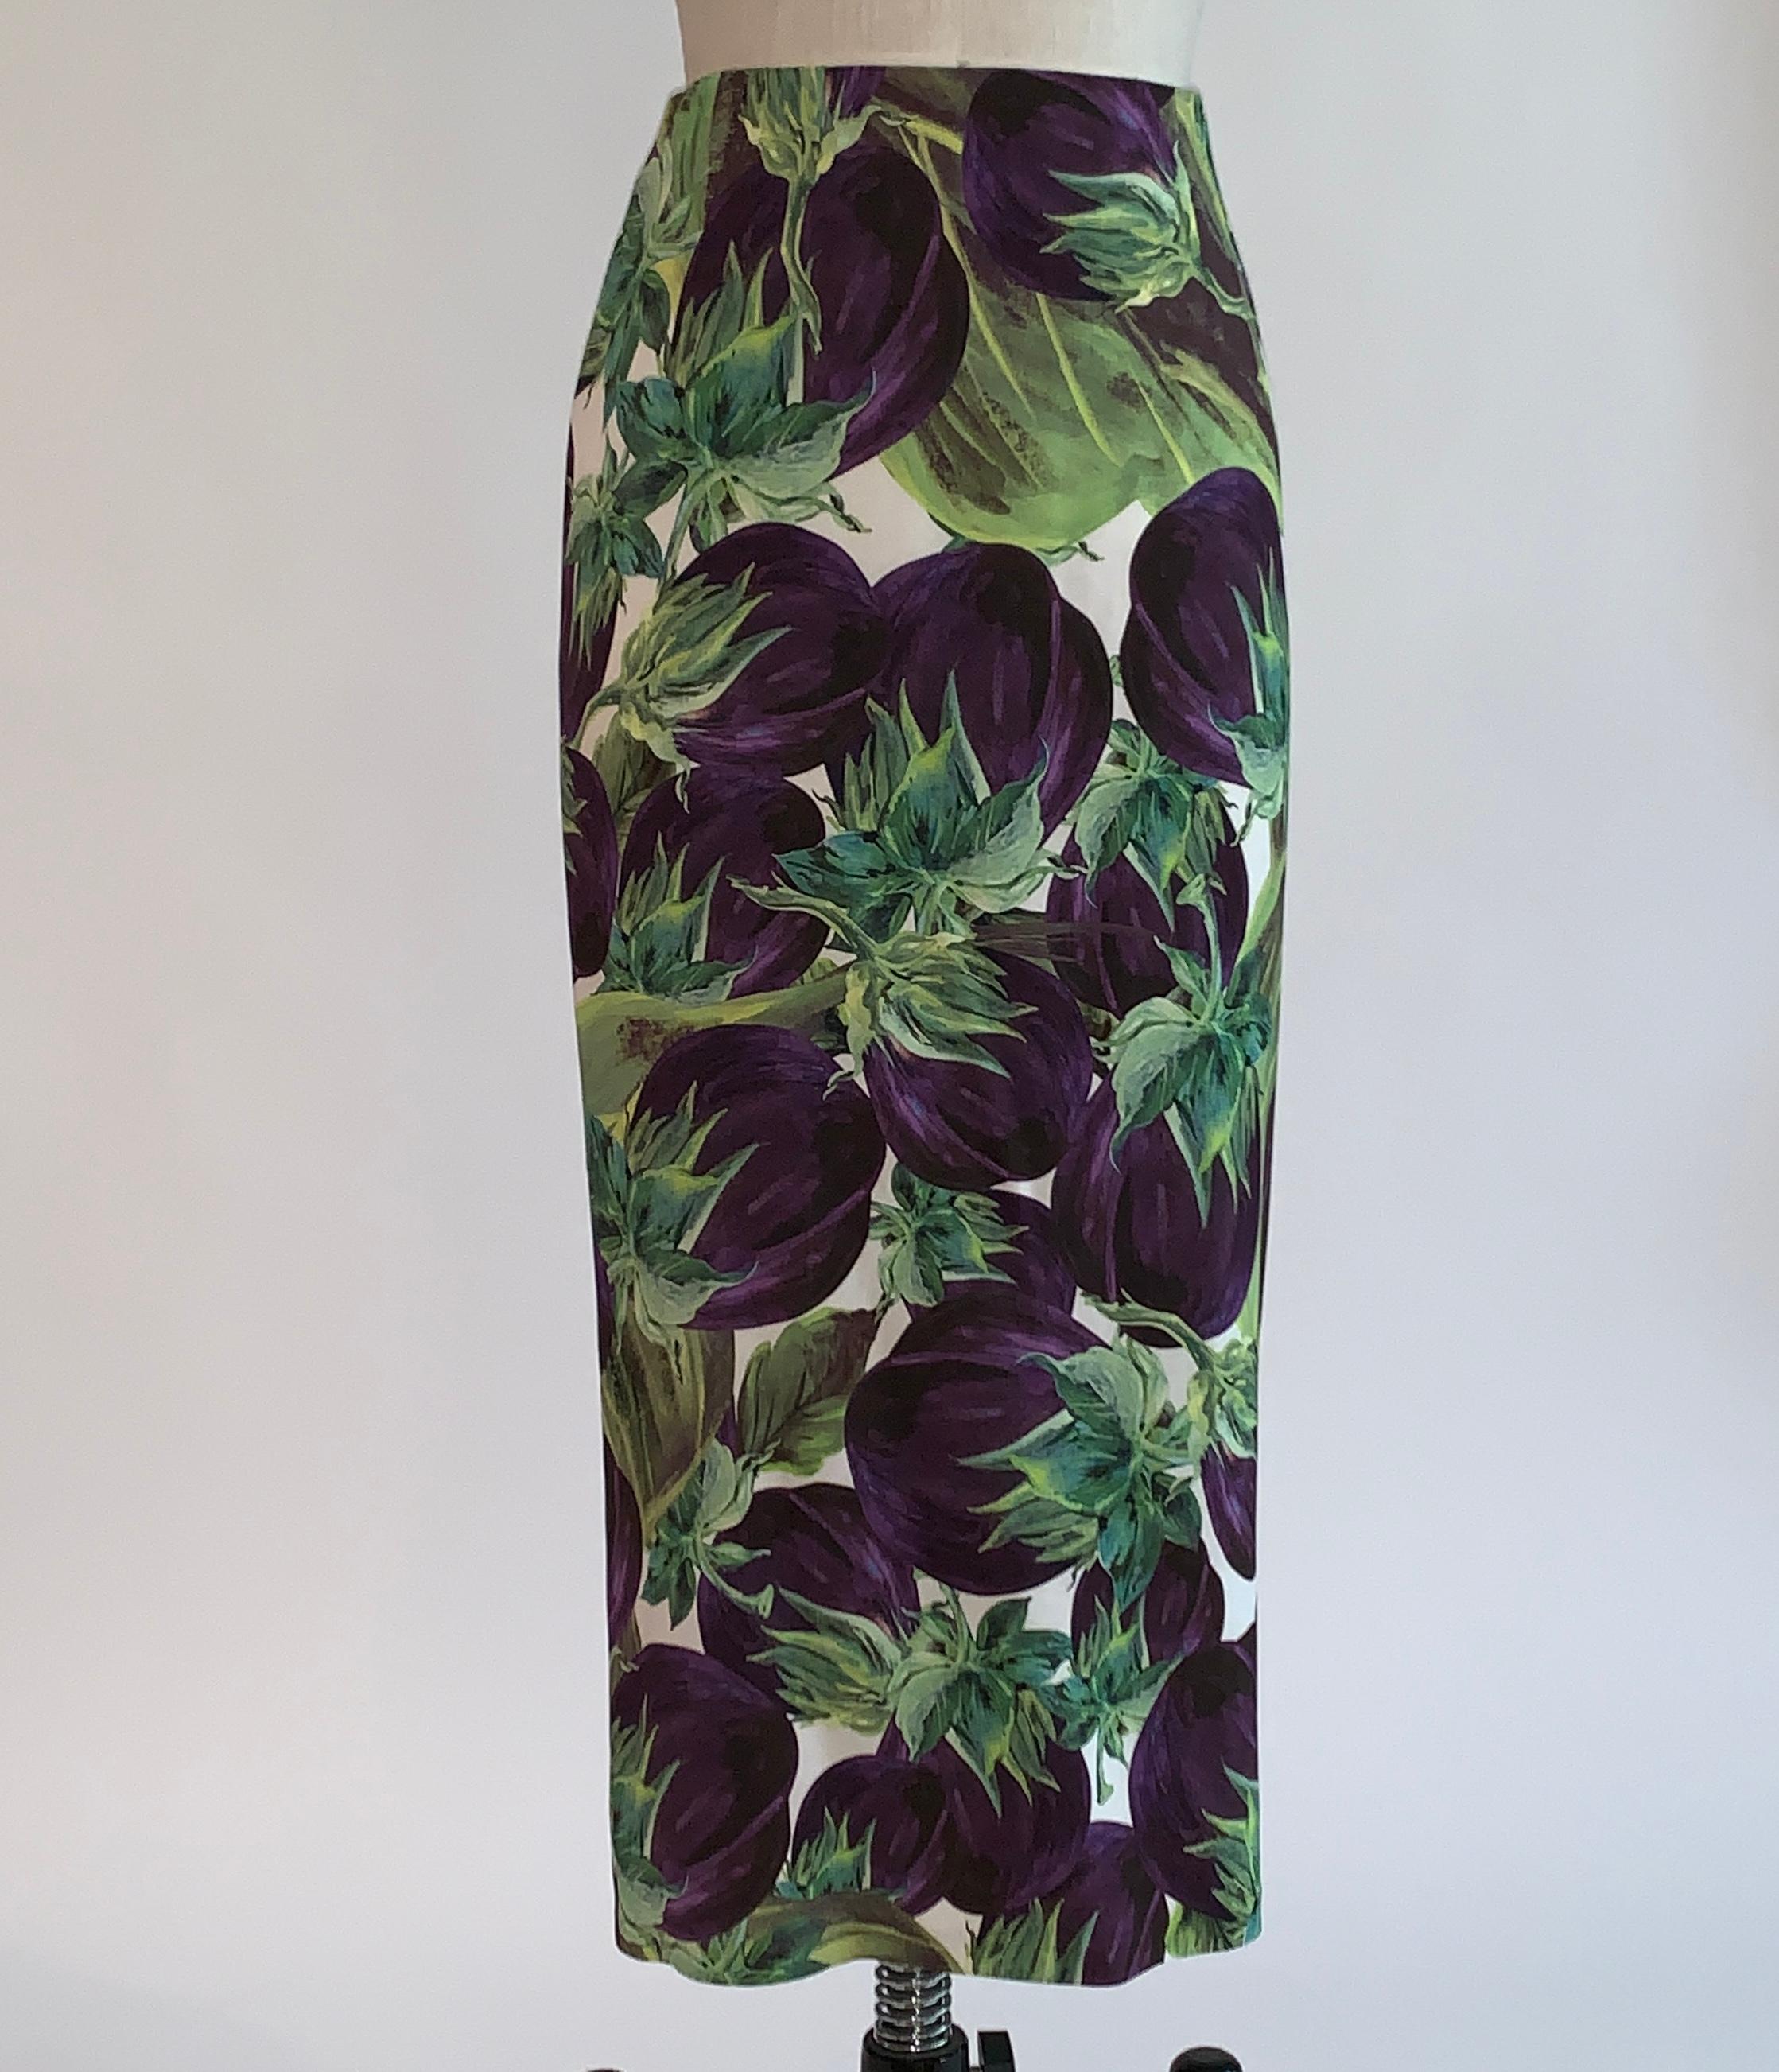 Dolce & Gabbana eggplant print pencil skirt in purple, white, and green from their Spring 2012 collection. Back zip and hook and thread loop closure.

96% viscose, 4% elastane. Unlined. 

Made in Italy.

Size IT 42, approximate US 6. See